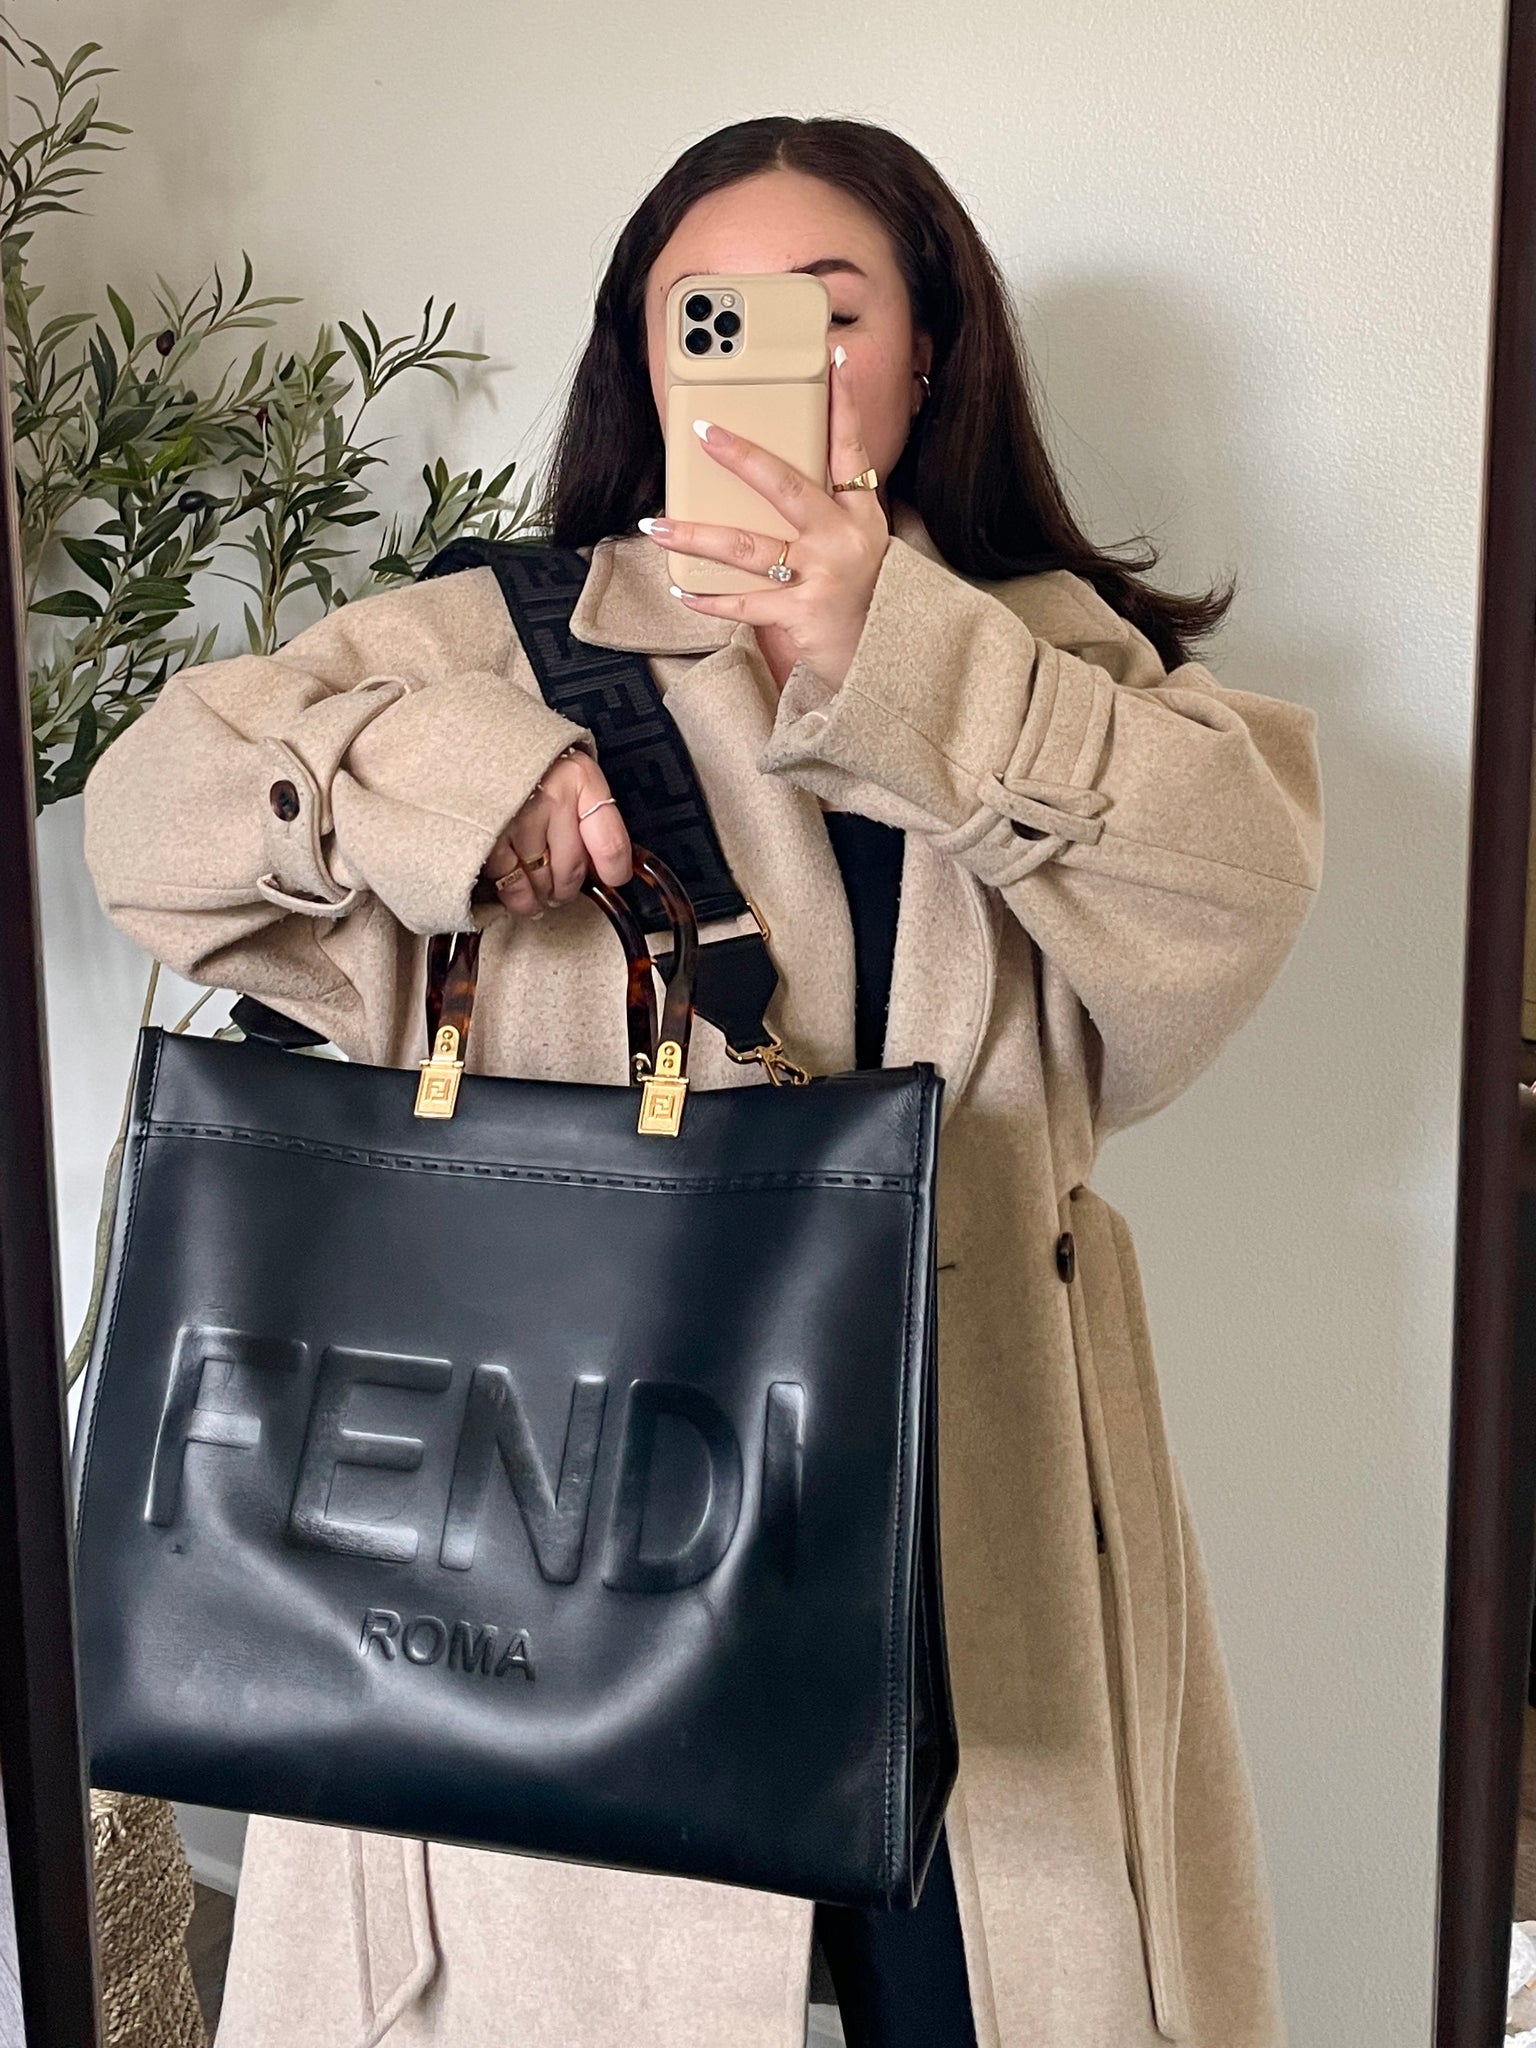 Fendi bag strap: Exclusive accessory for your handbags - Christinabtv |  Fall fashion outfits, Top fashion bloggers, Spring outfits women